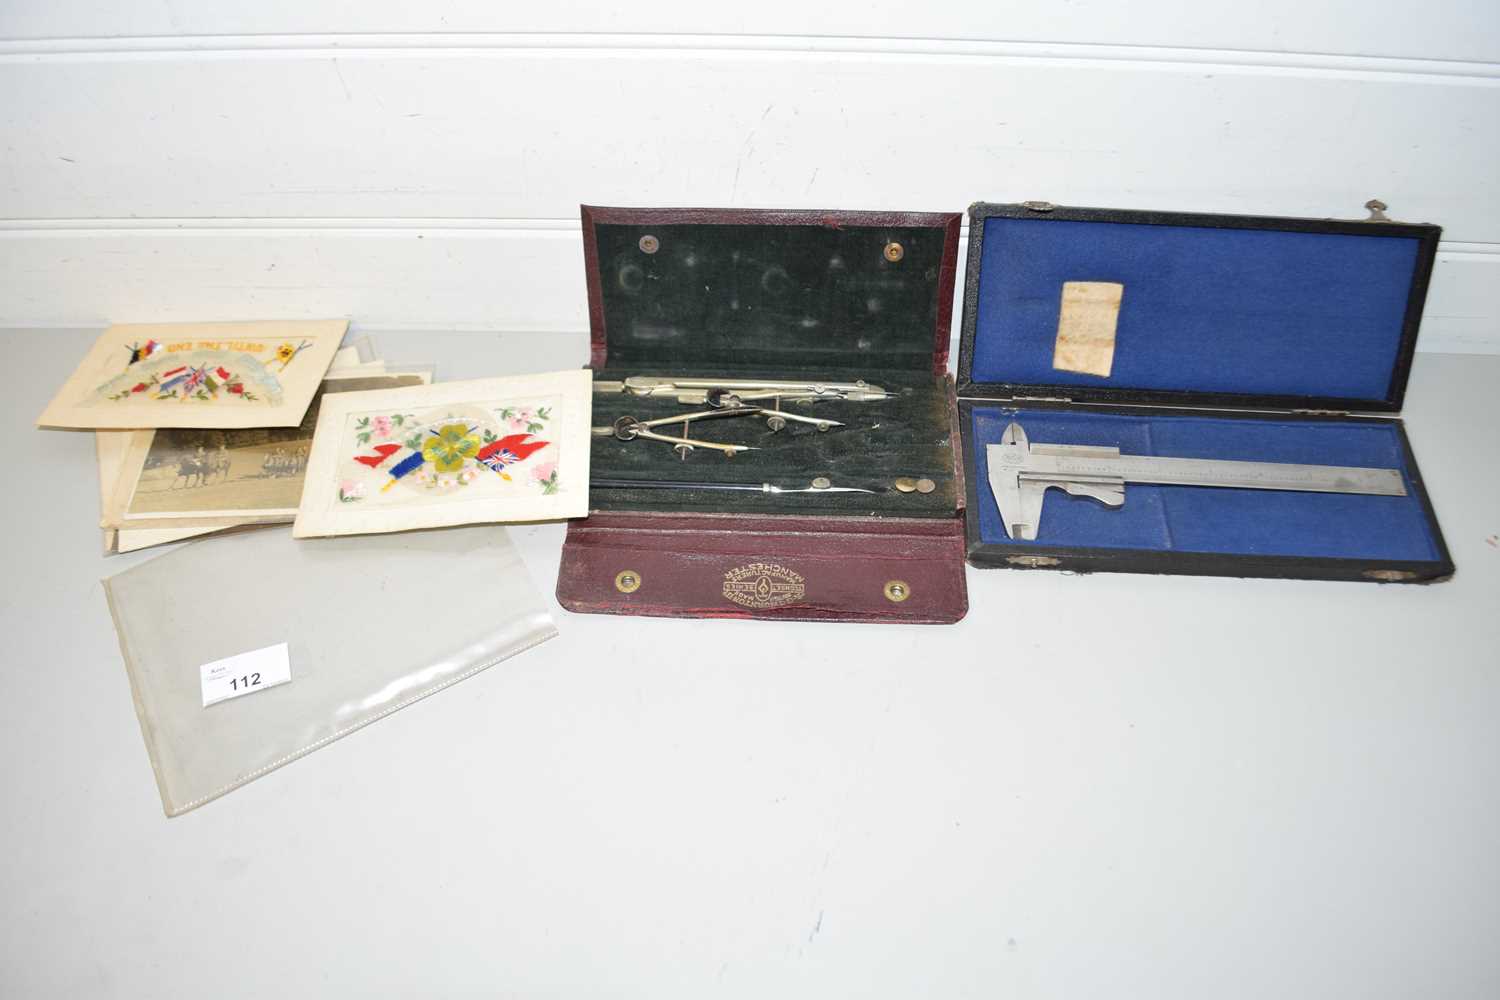 CASED HELIOS CALIPER TOGETHER WITH VINTAGE TECHNICAL DRAWING INSTRUMENTS AND FIRST WORLD WAR SILK